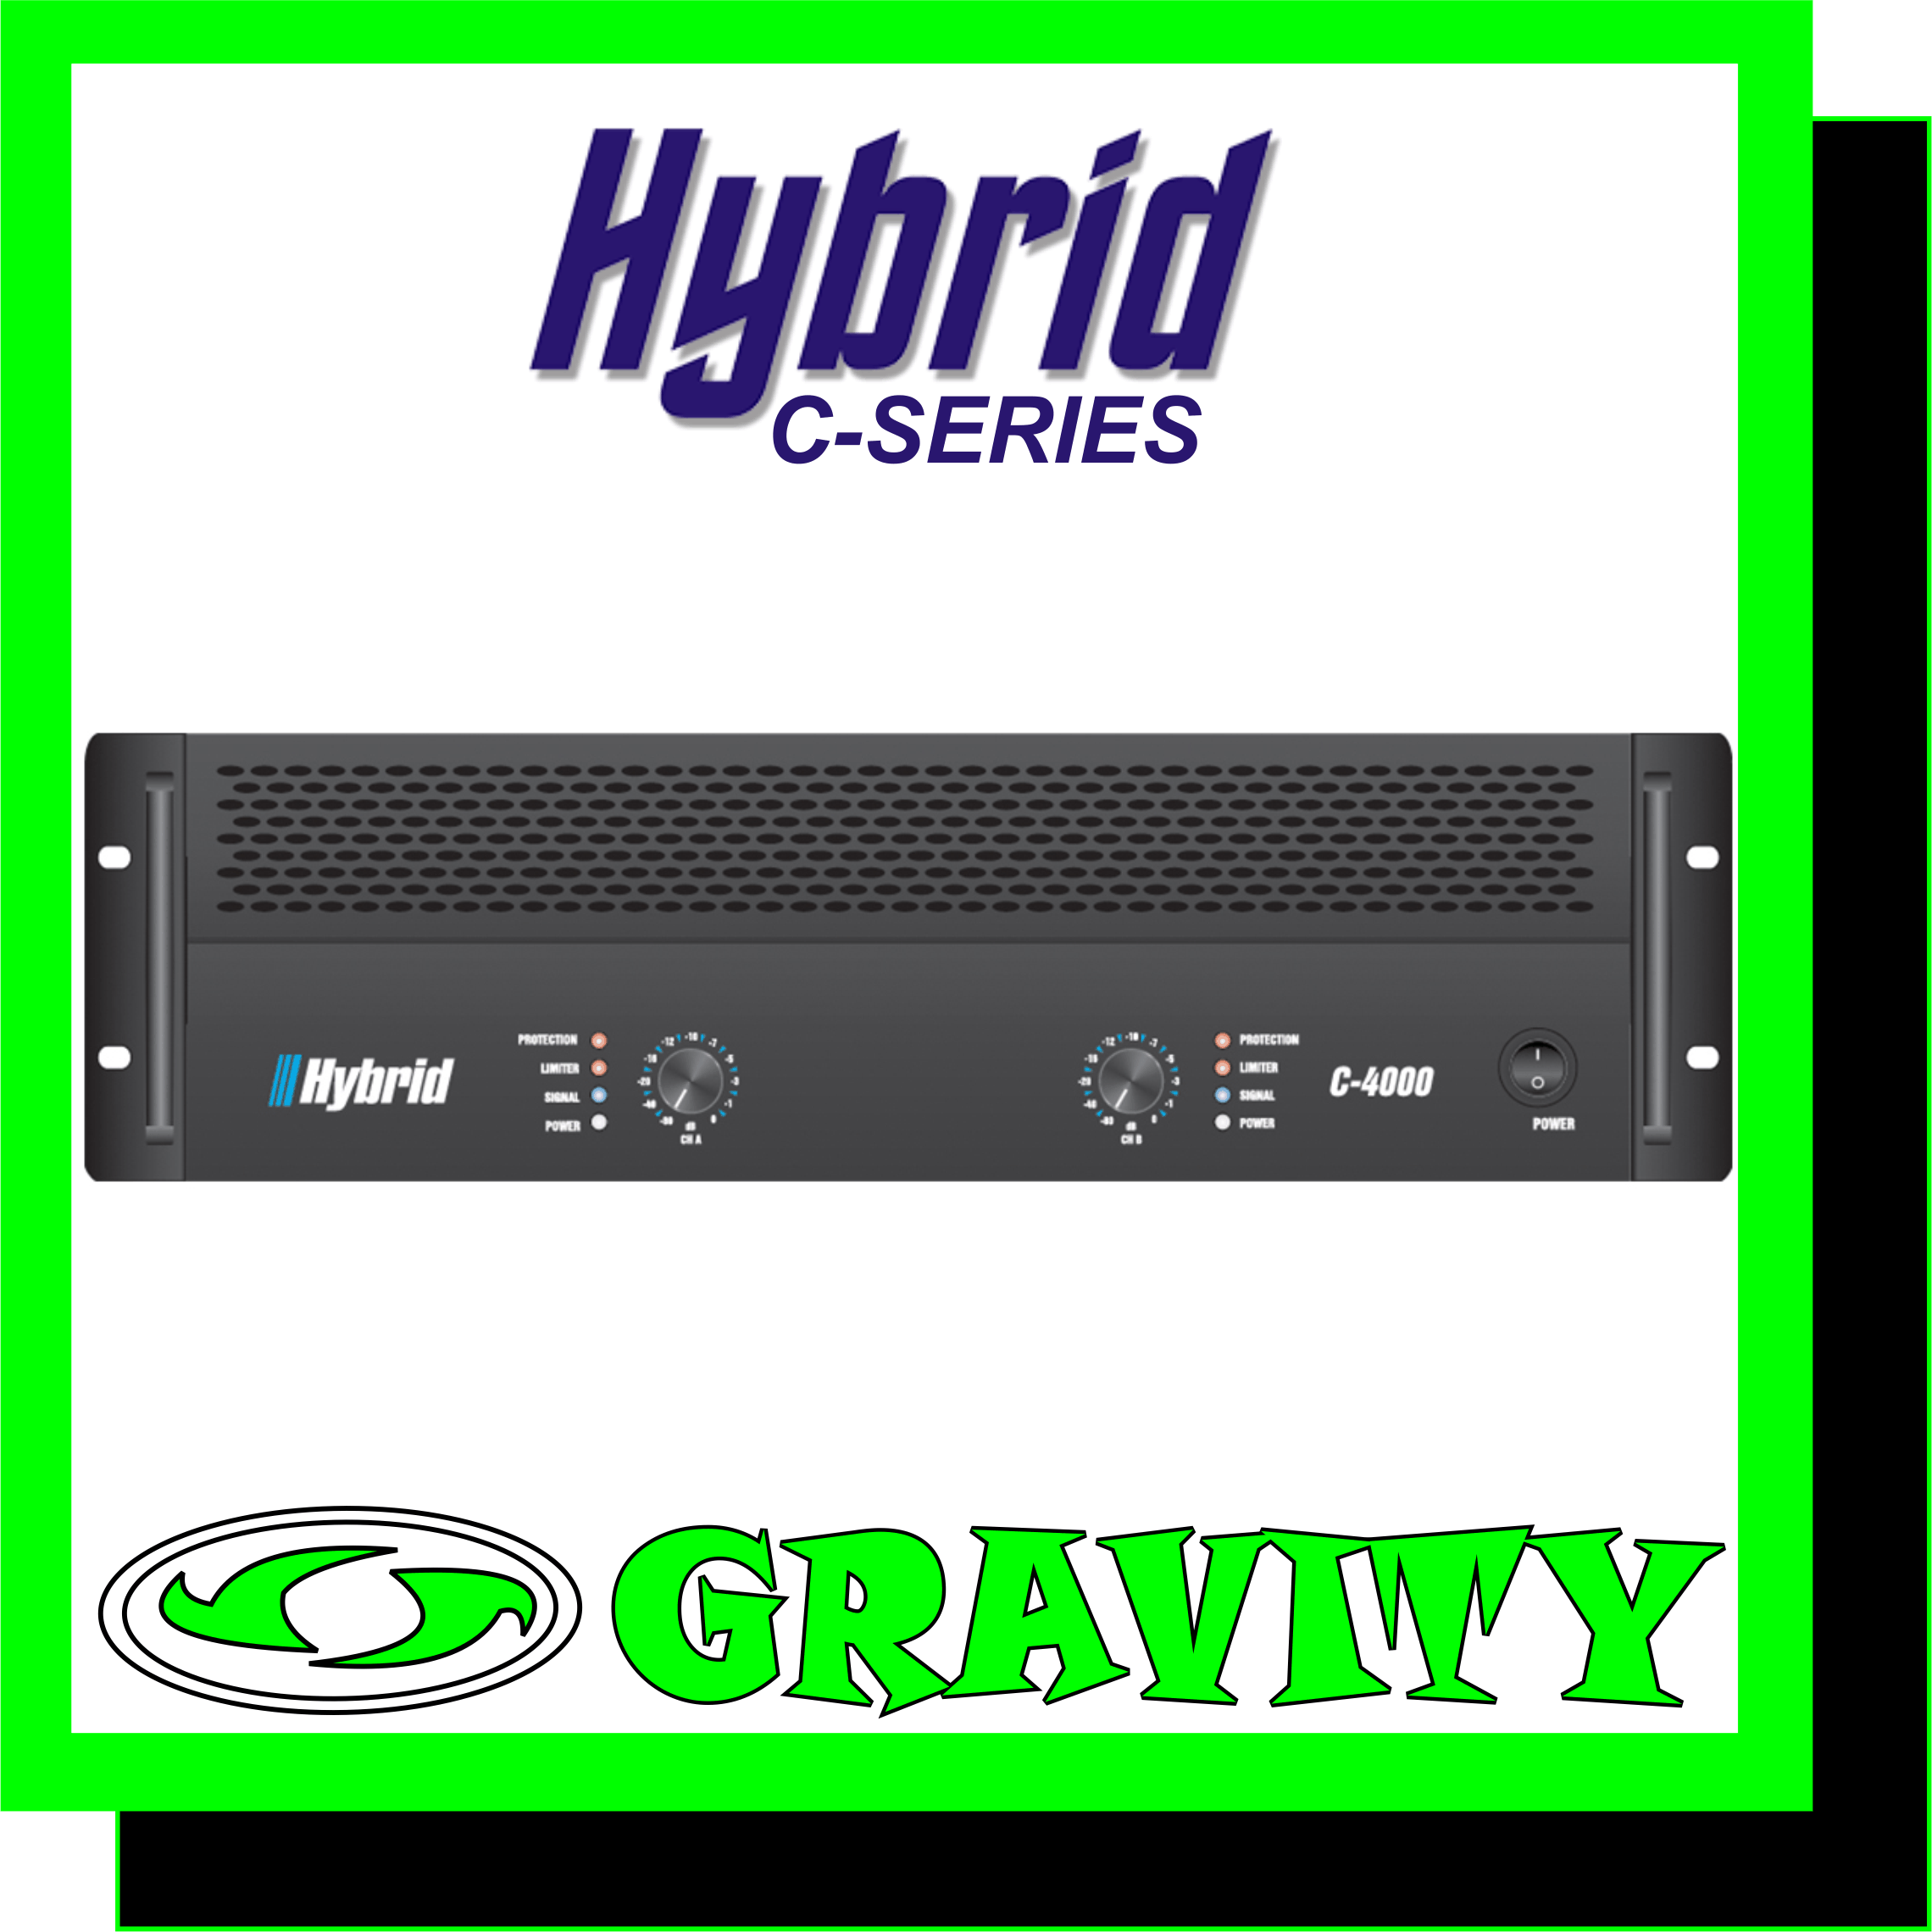 Hybrid C4000MK2 2X2000W with X-over  8Ohm Stereo Power . RMS/CH 1300W 4Ohm Stereo Power . RMS/CH 2000W 8Ohm Bridged Mono Power . RMS 4000W  Frequency Response ( 1W/8O) 20Hz 20KHz +/- 3dB Protection DC Protection . Short Circuit Protection . Thermal Protection . Inrush Current Protection . Soft Start Portection . Input & Overload Protection THD+N (20Hz-20KHz) <0.1% Damping Factor (1KHz @ 8O) >700 Hum & Noise(A weighted . -80dBW) 100dB Input Impedance (Balanced / Unbalanced) 20K Ohm / 10K Ohm Crosstalk (20Hz-20KHz Rated Power 8O) >60dB Cooling 2 x Fans . Dual speed . Front to Rear Airflow  Input Connectors Jack/Female XLR Neutrik Combo + Male XLR Neutrik Output Connectors 3x Neutrik Speakon Dimensions (WxHxD) mm 483 x 132 x 518 Weight Kg 33.5